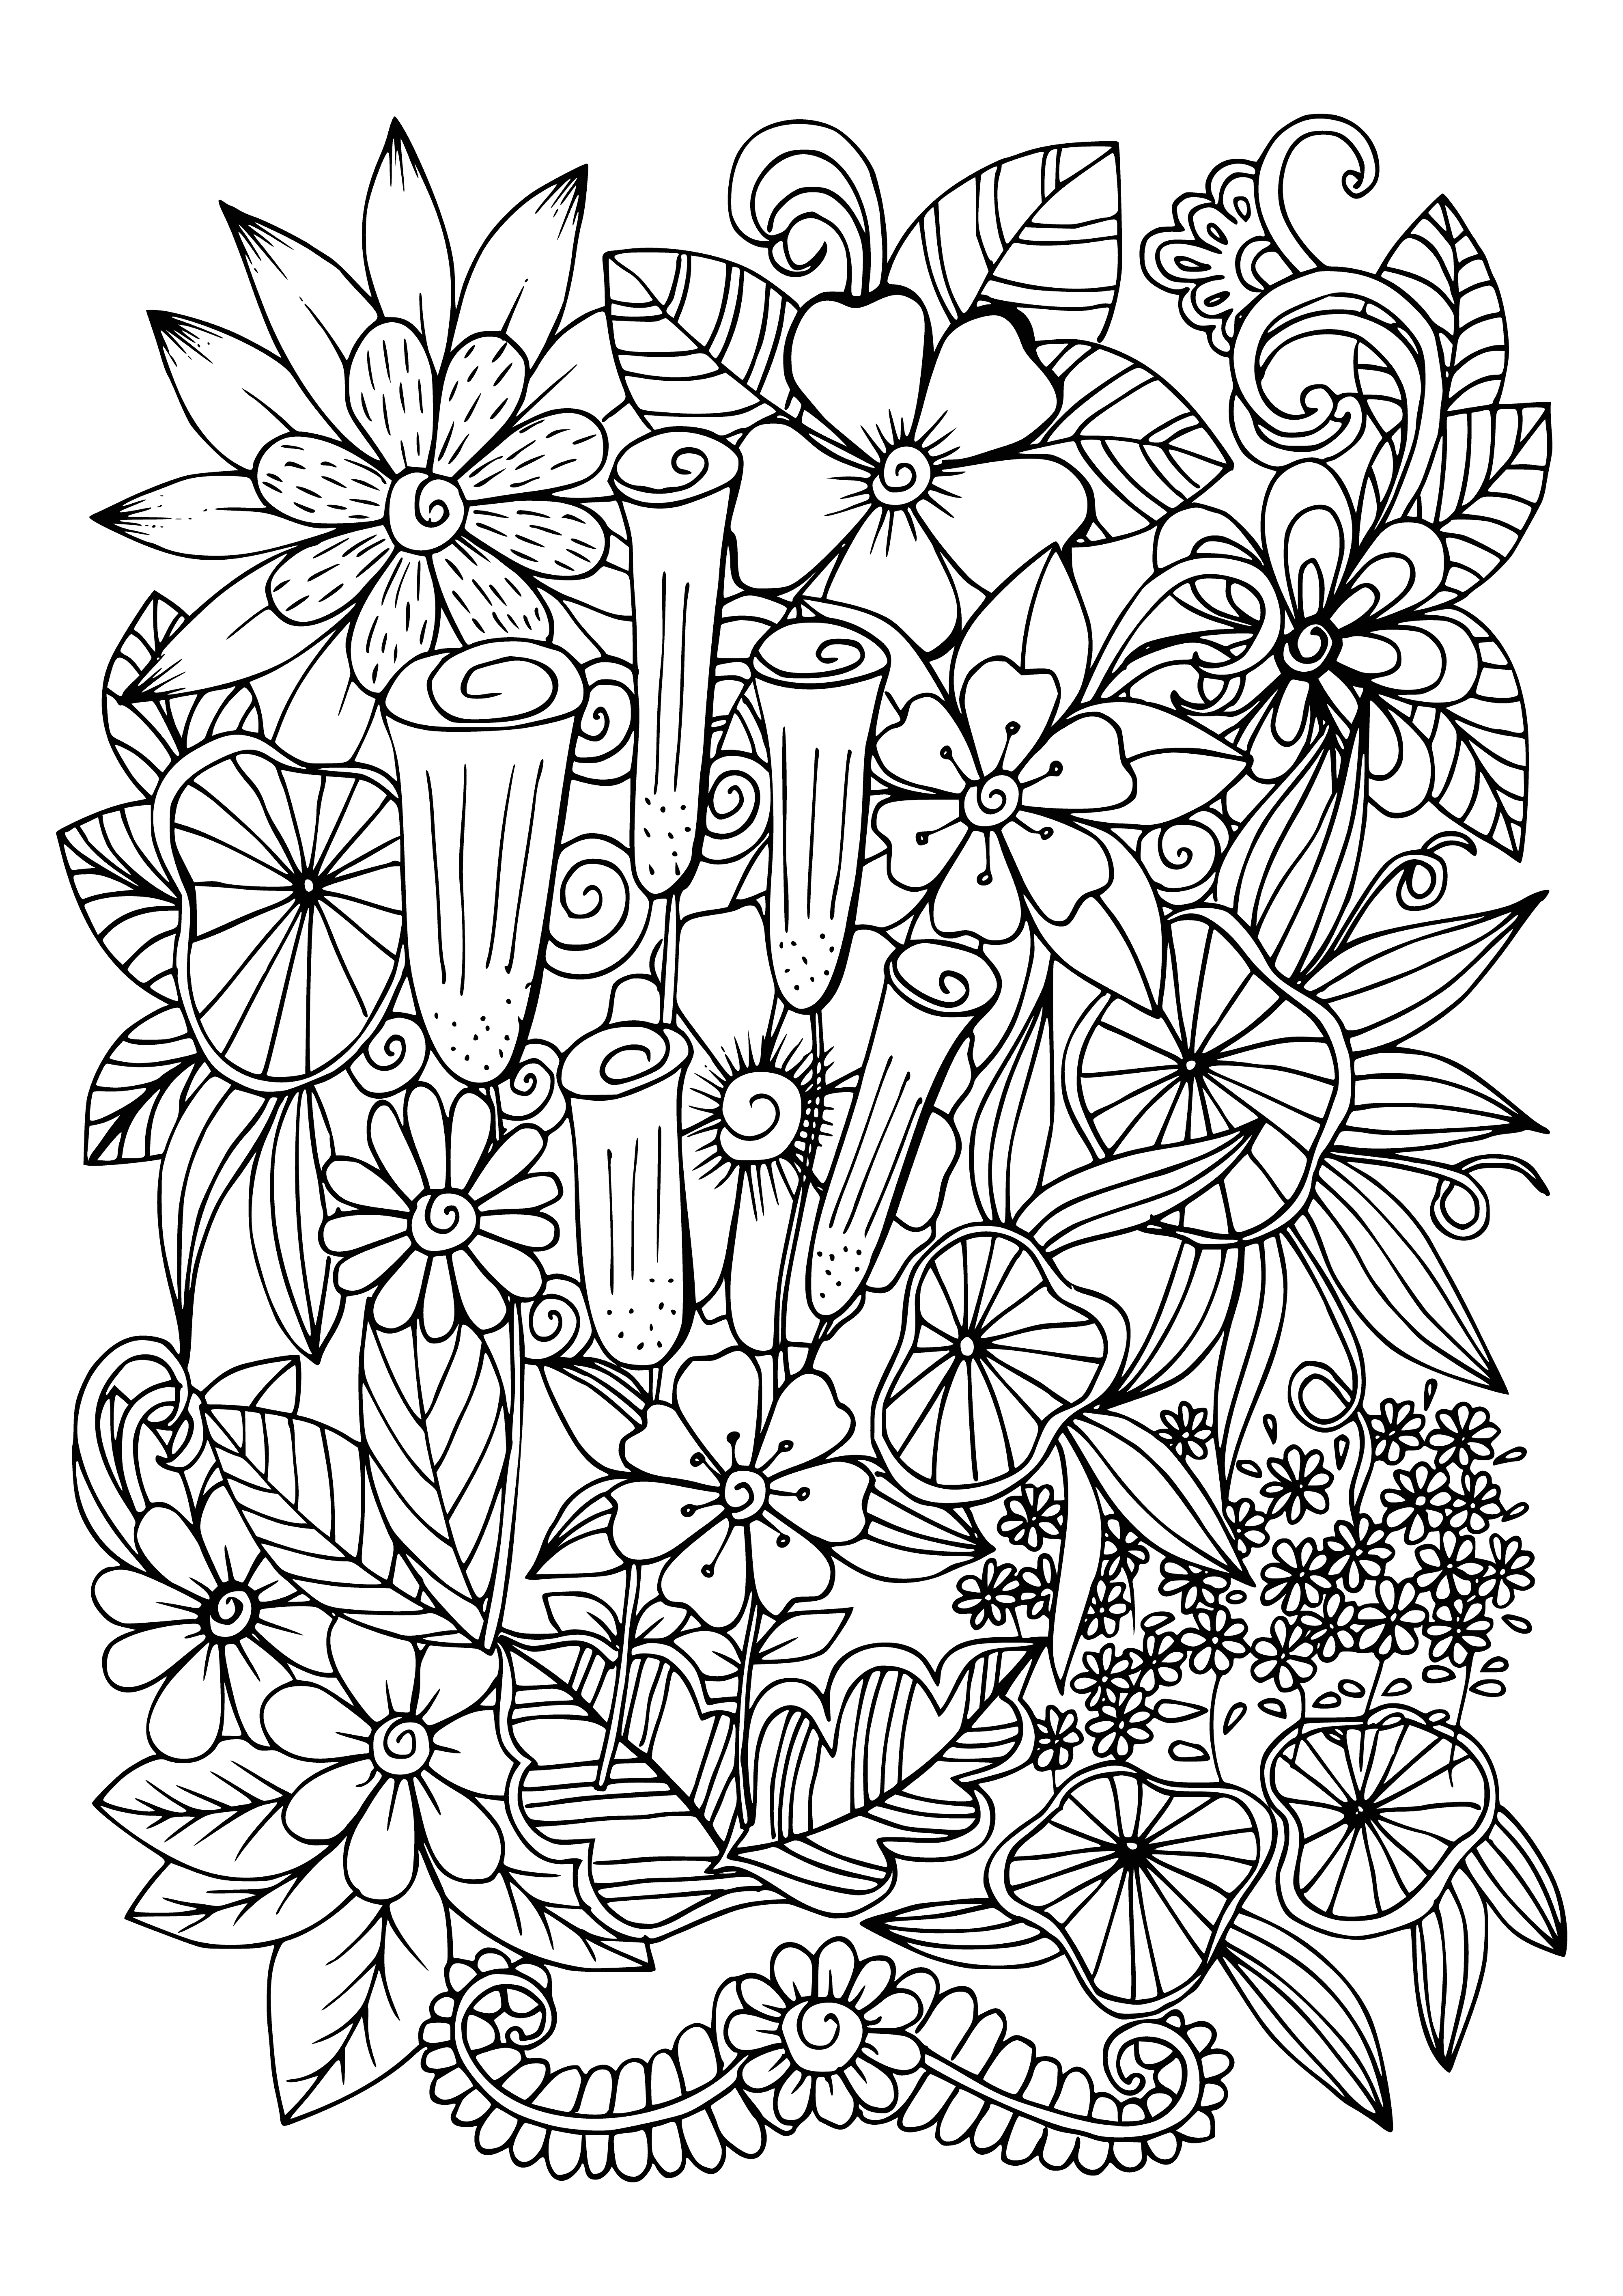 Flowers coloring page